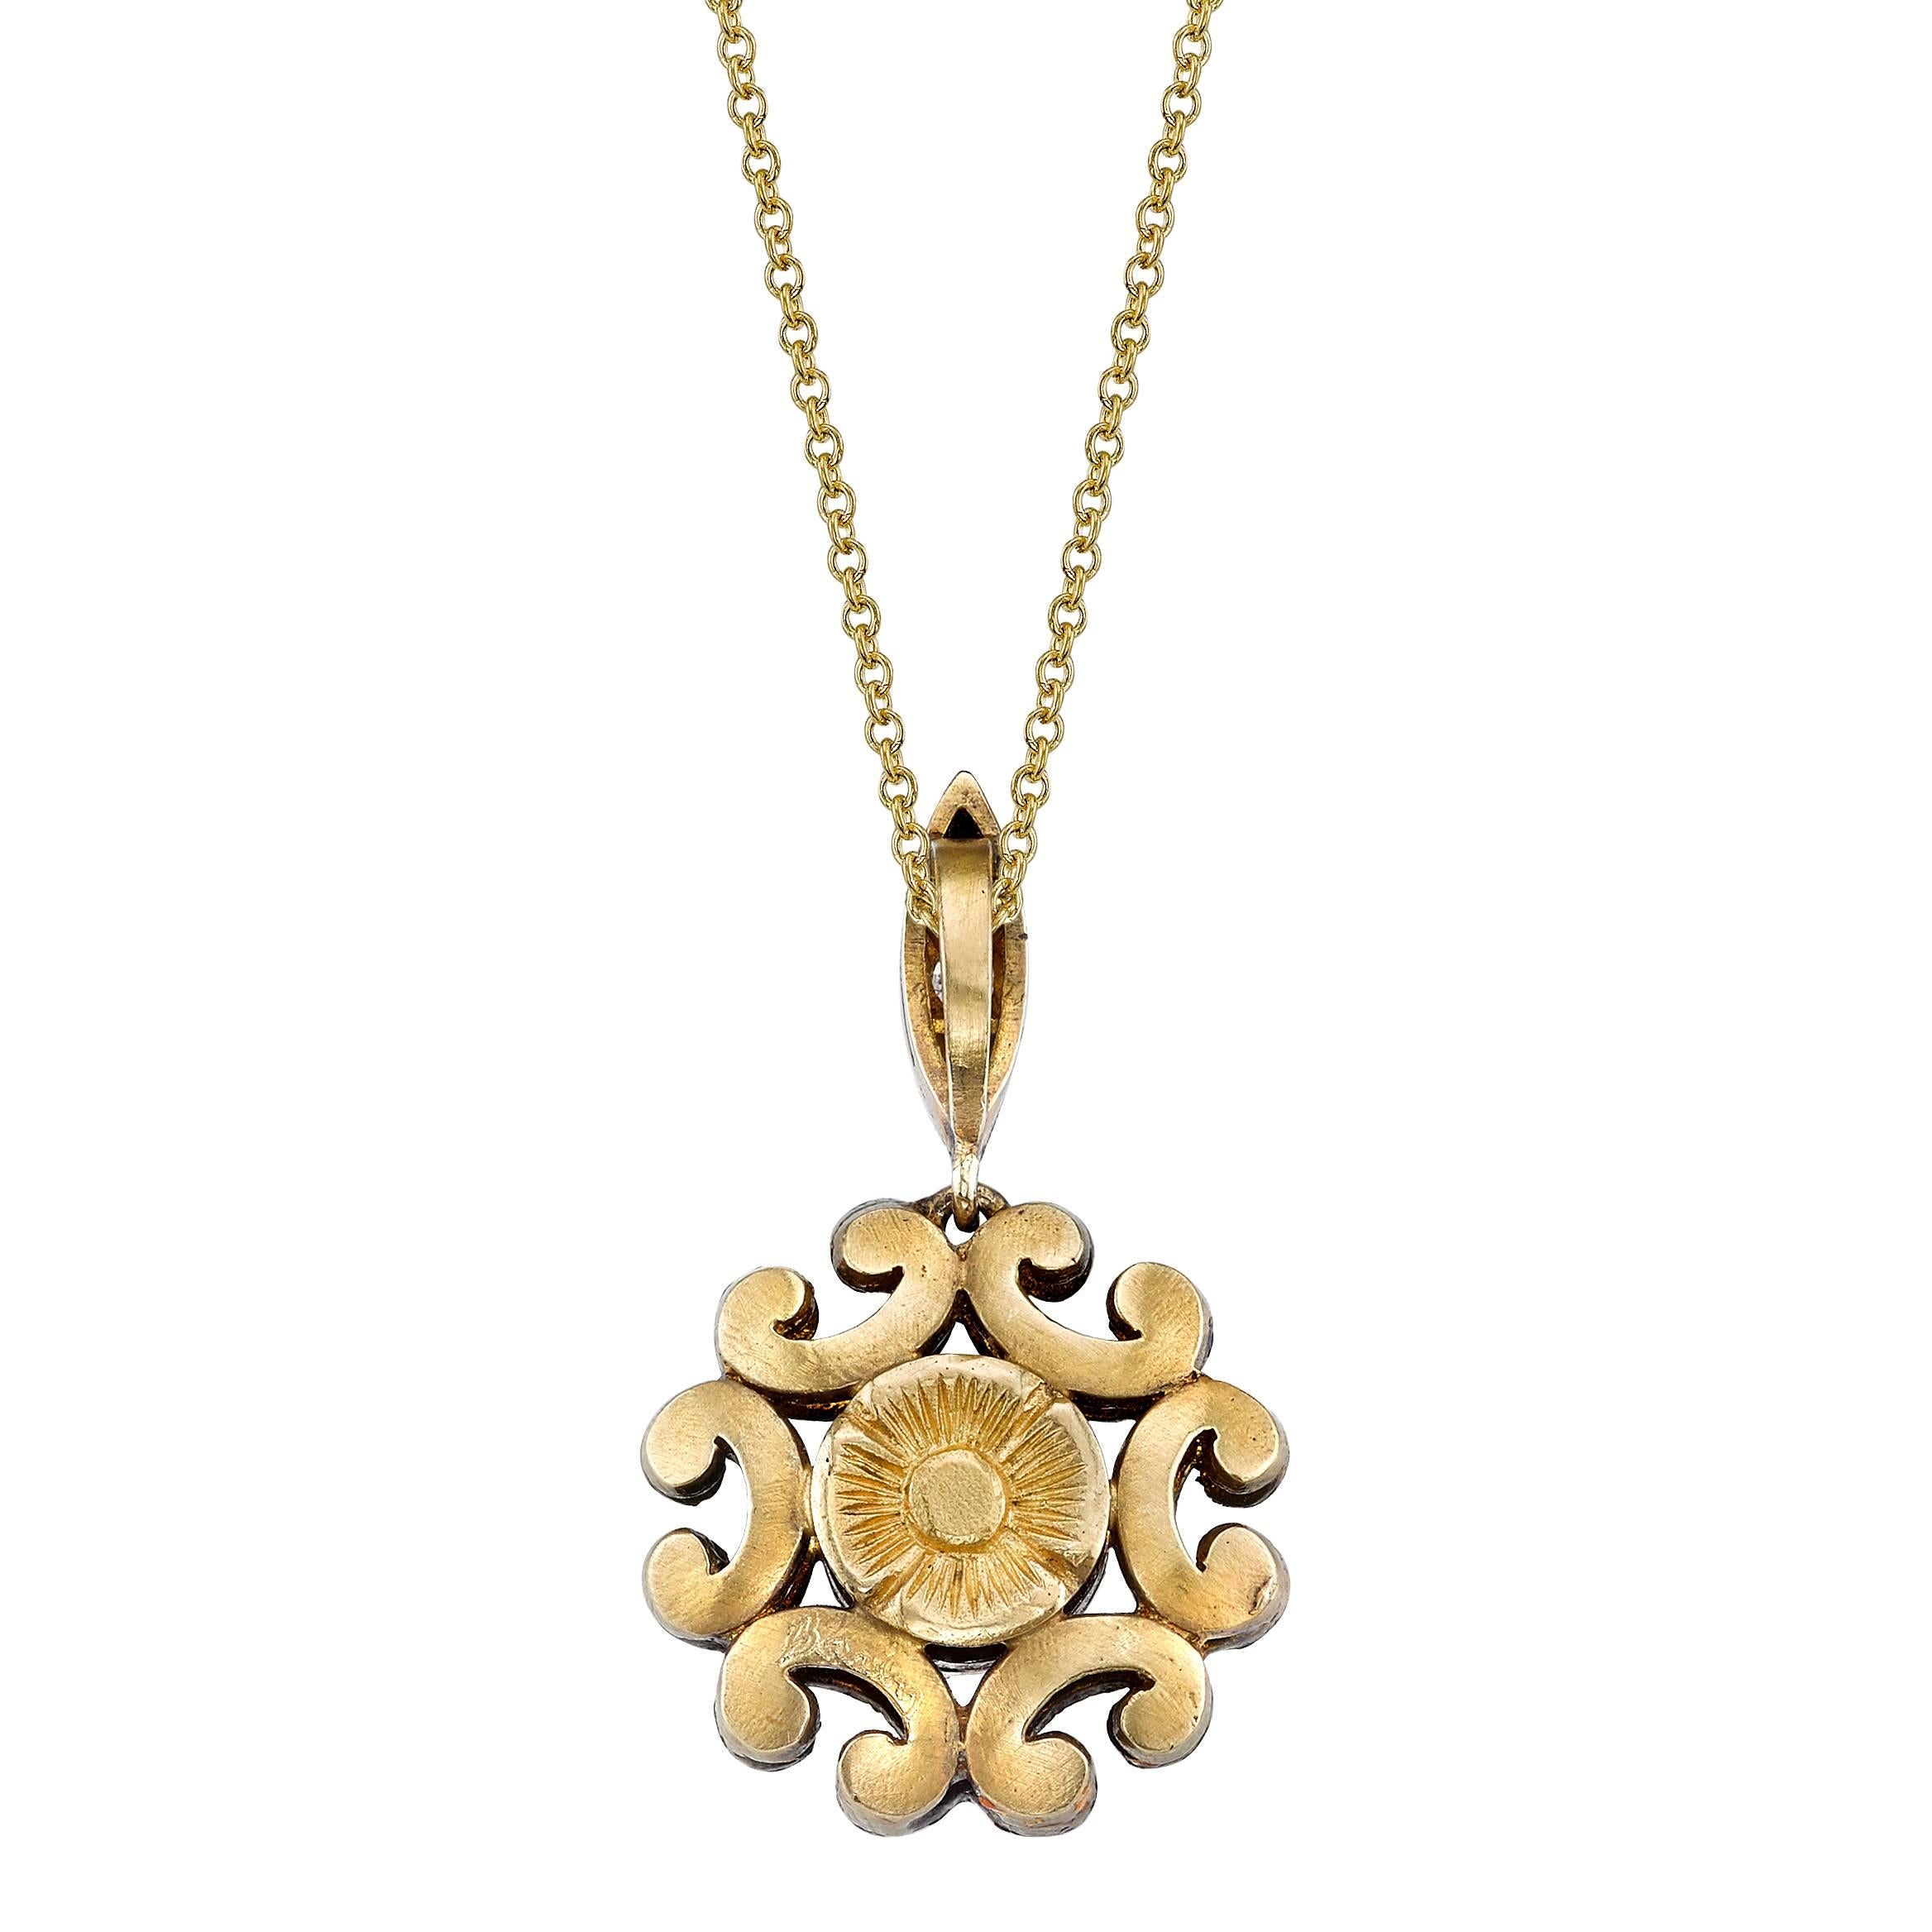 18 Karat Yellow Gold Necklace with a 0.70 CT Rose Cut Center Diamond and 0.28 CT Round Brilliant Cut Diamonds, accented with an Antique Silver Patina Finish. 

Inspired by the Edwardian Era, a time when fine jewelry was a crucial component of